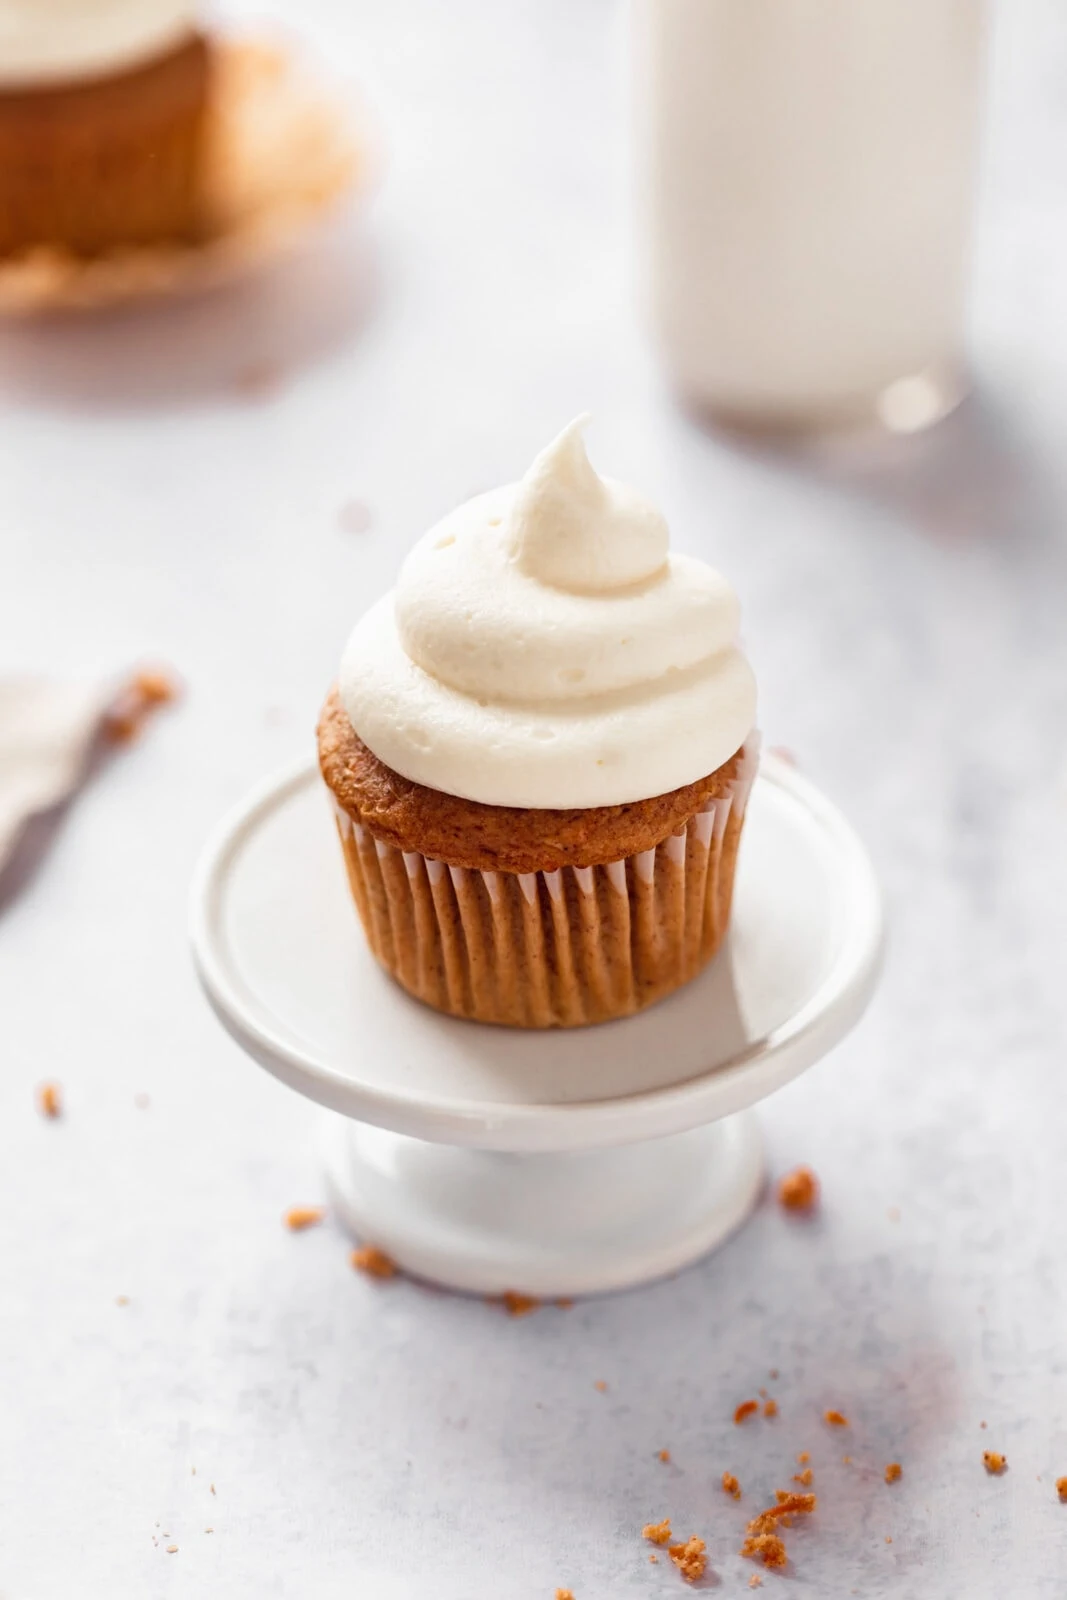 perfect fluffy cream cheese frosting on a carrot cake cupcake